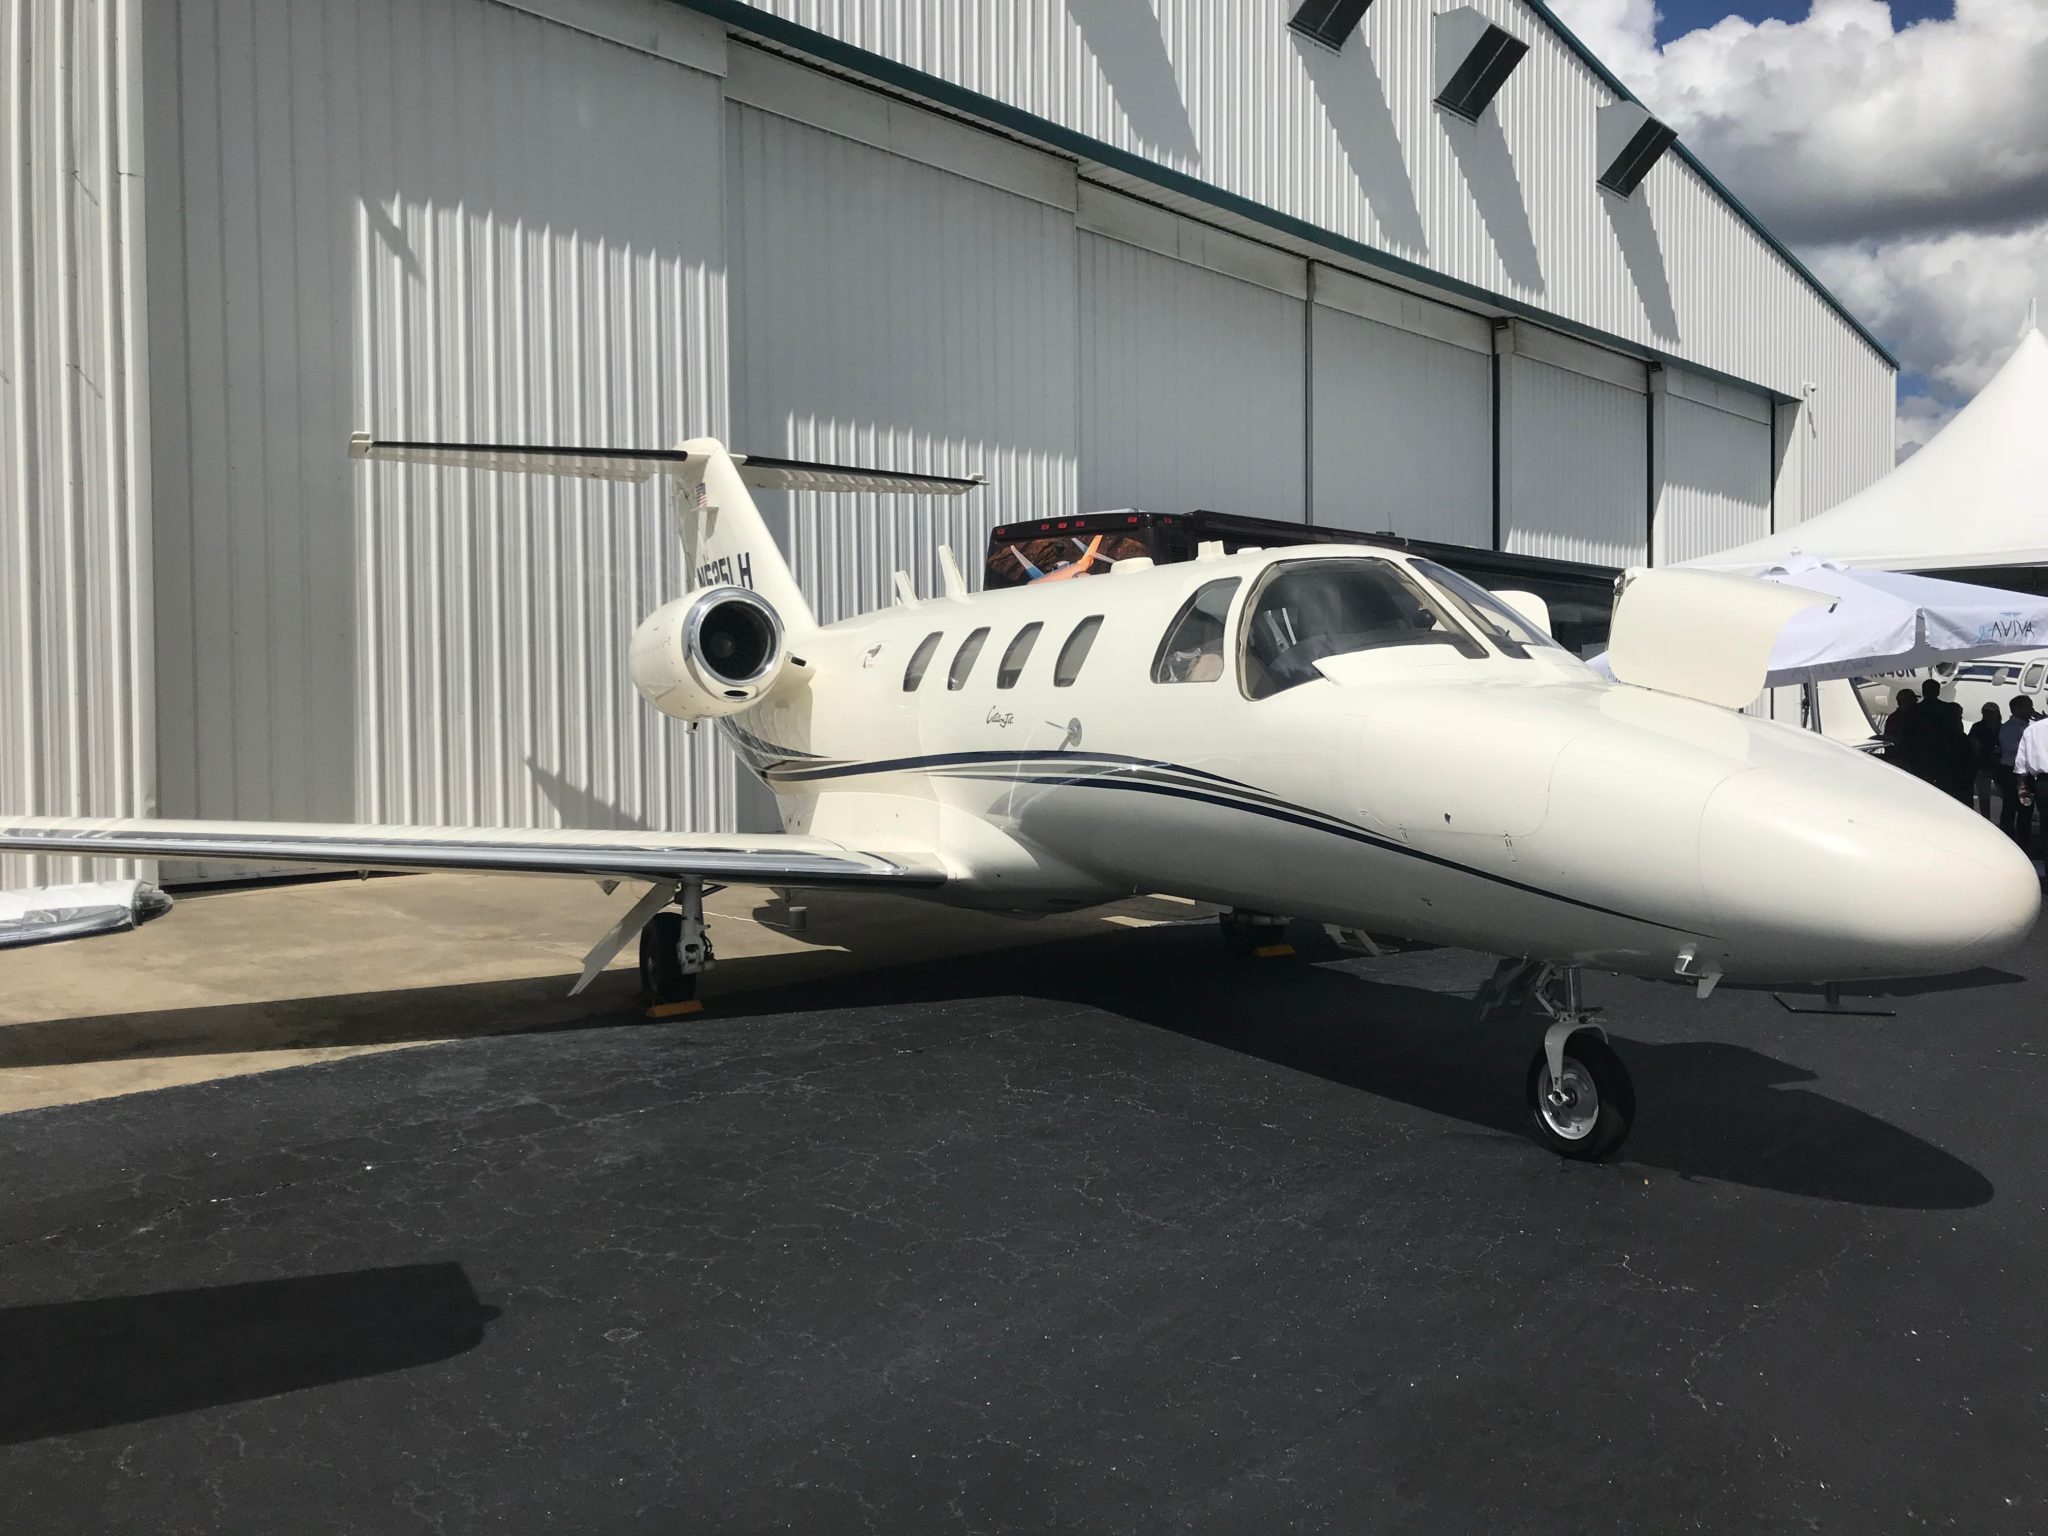 Private jet parked in front of hangar insurance